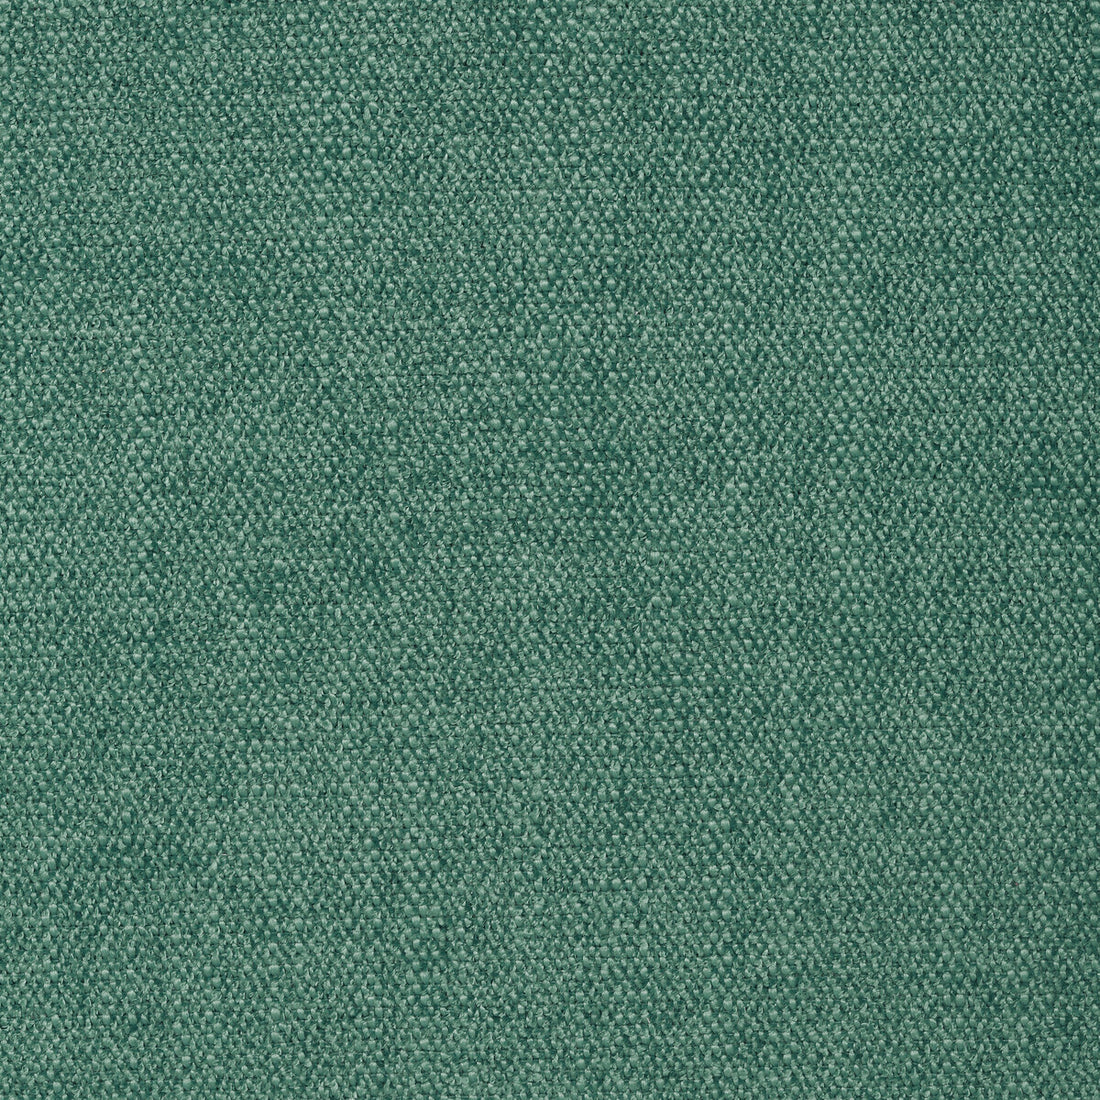 Kravet Smart fabric in 35113-35 color - pattern 35113.35.0 - by Kravet Smart in the Performance Crypton Home collection